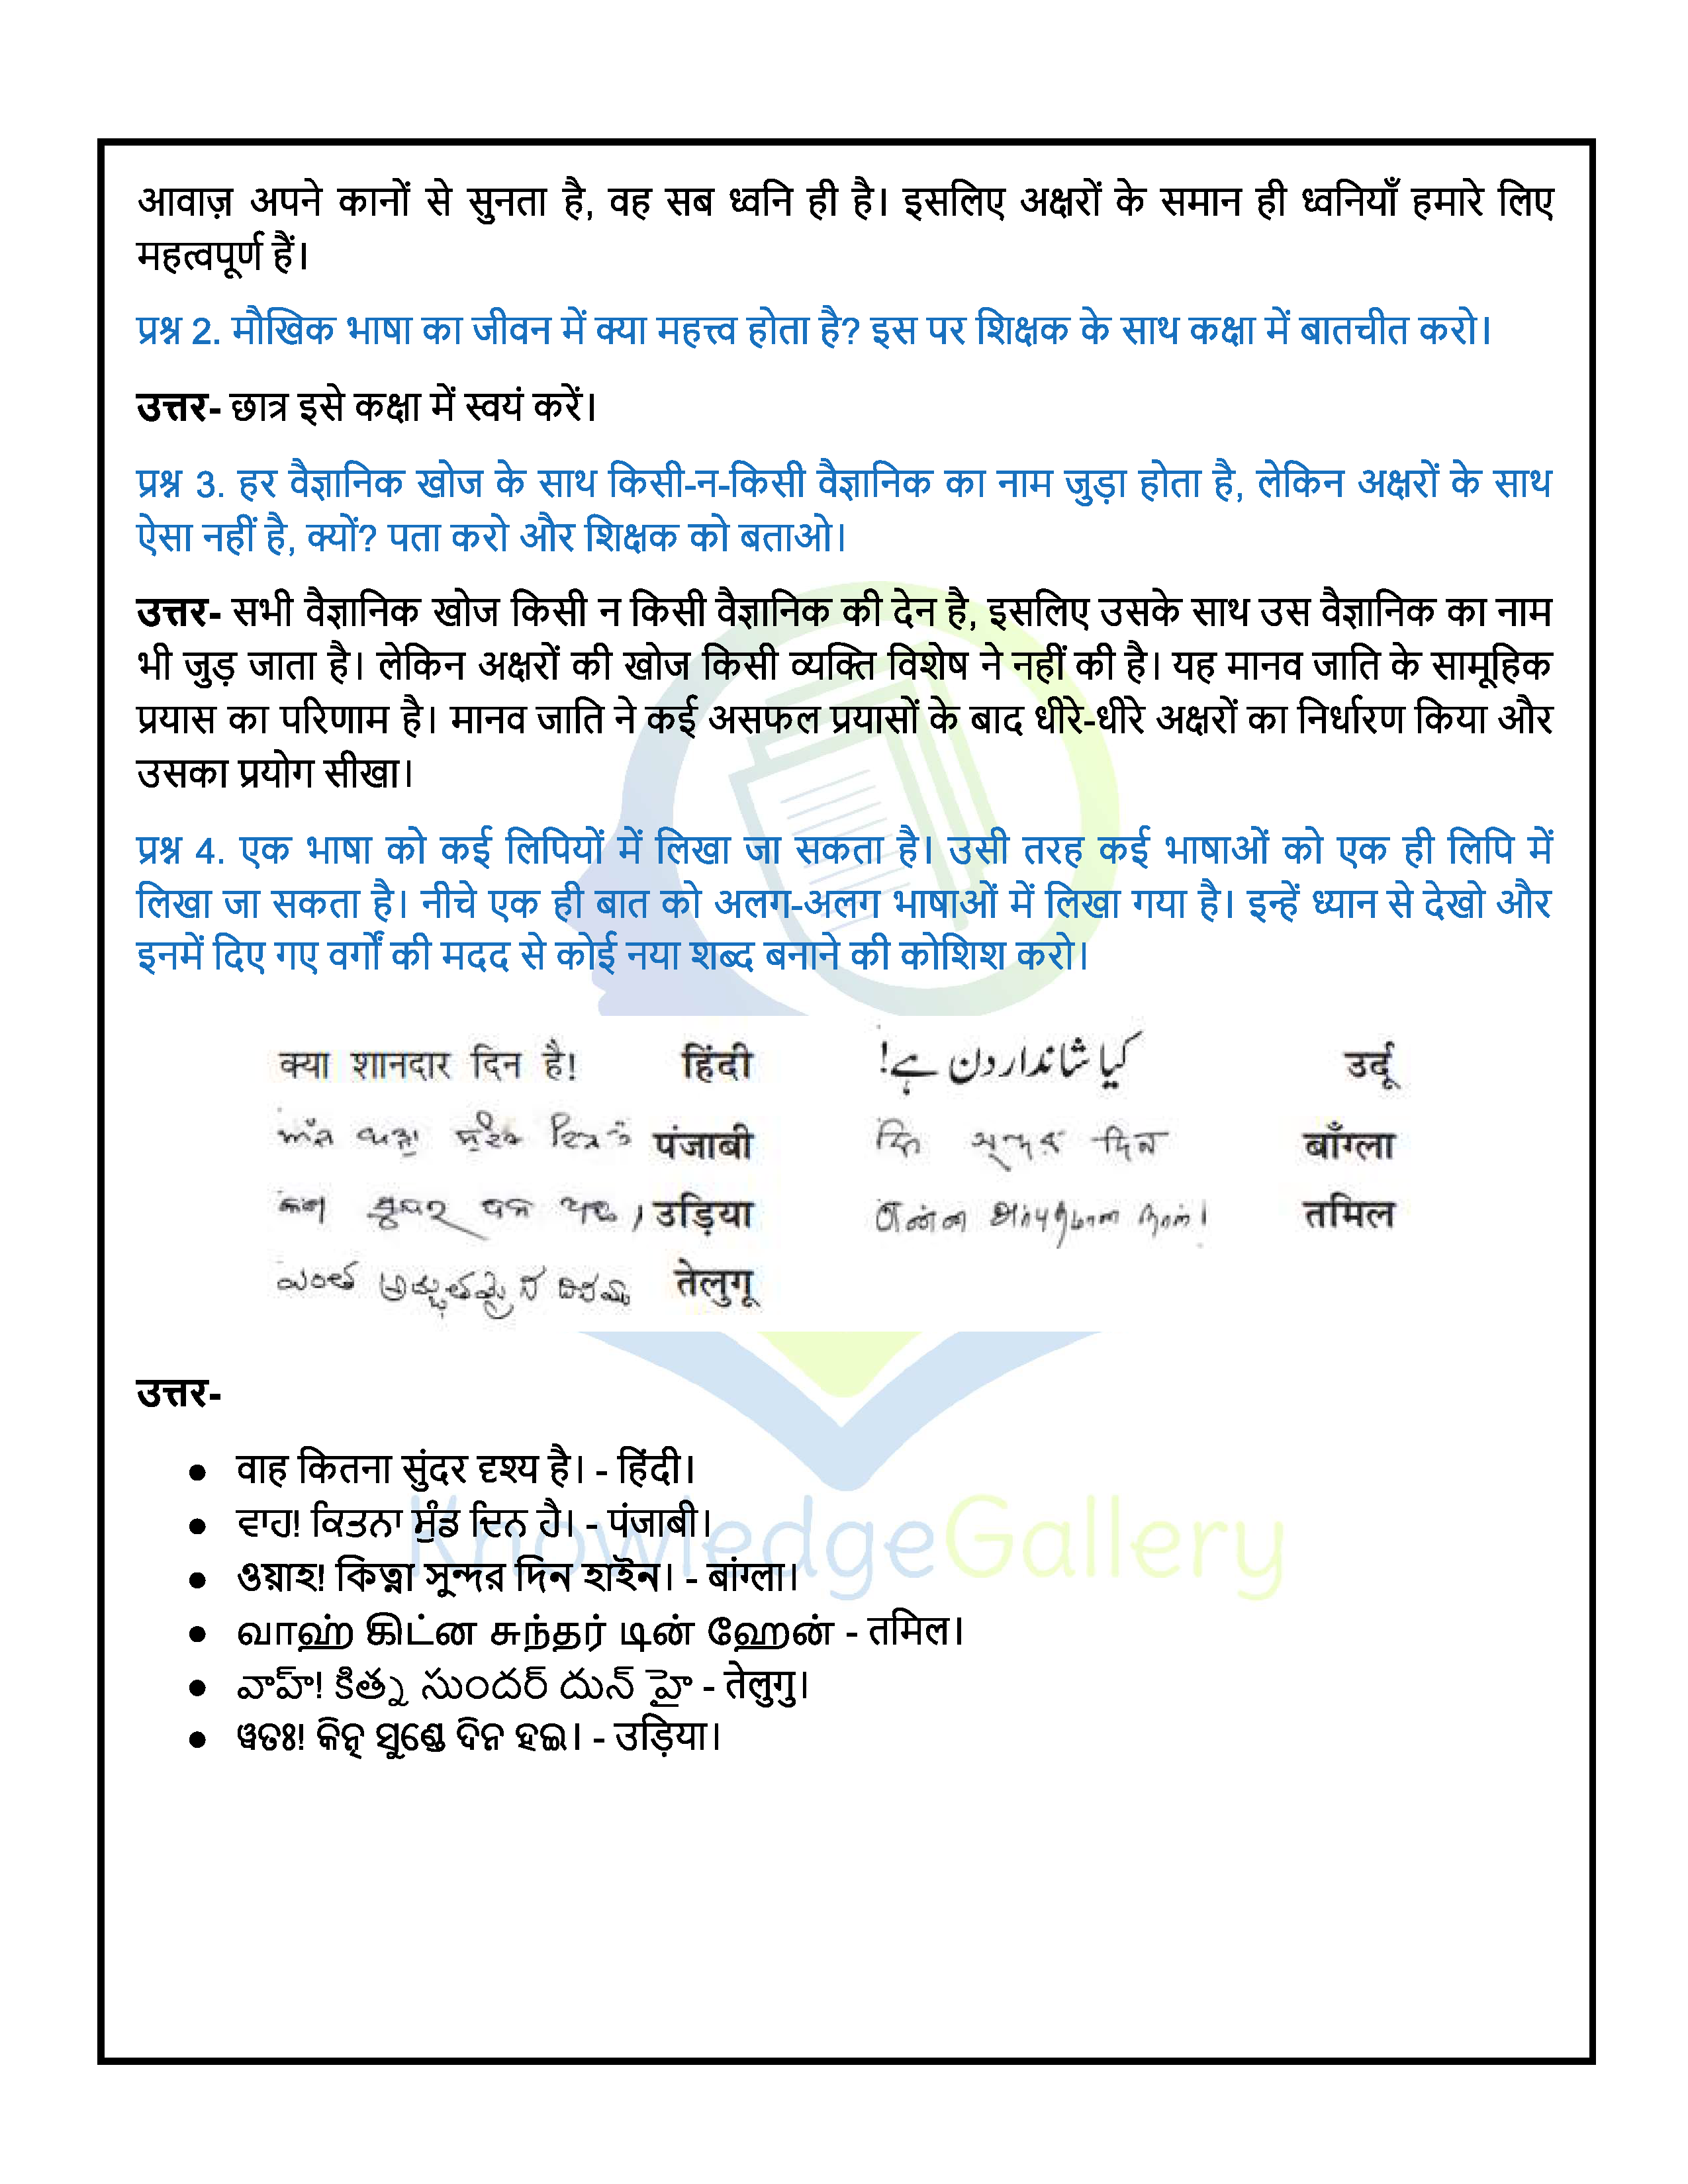 NCERT Solution For Class 6 Hindi Chapter 5 part 2